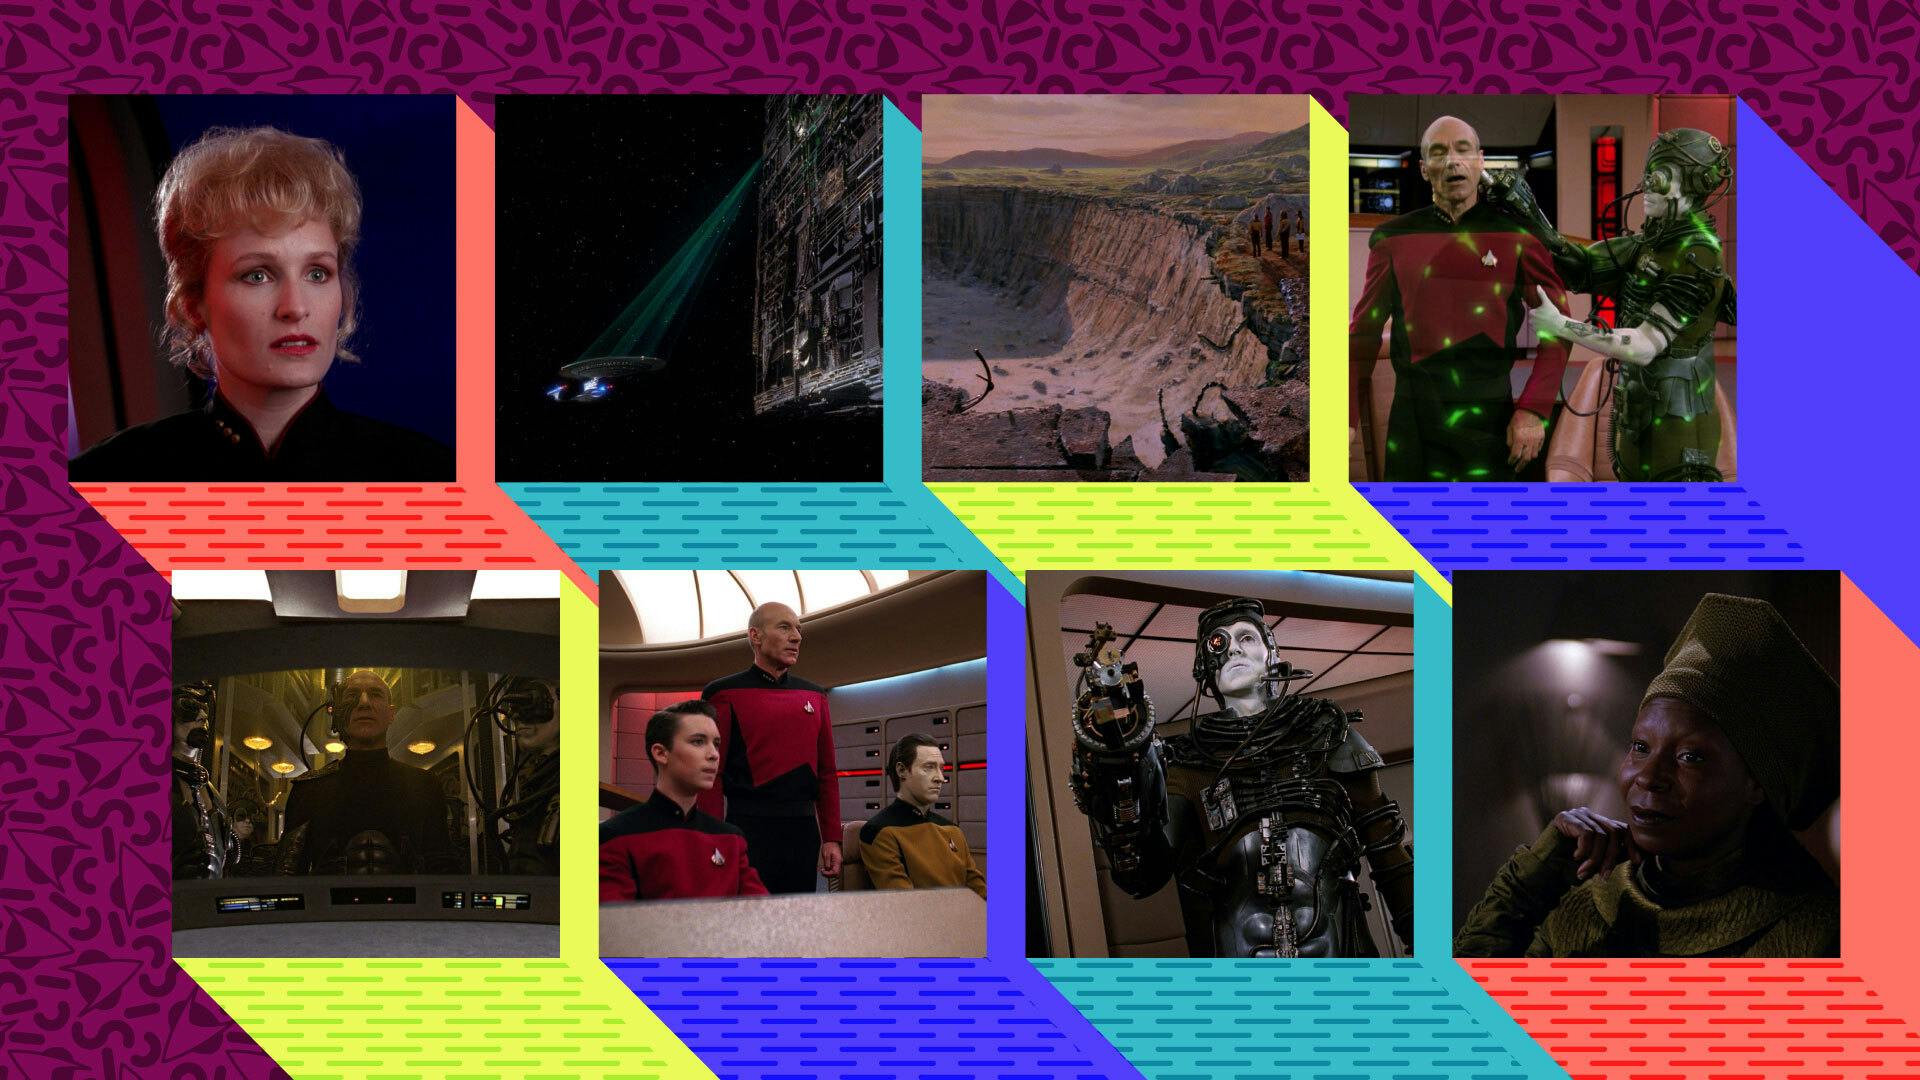 Episodic stills from Star Trek: The Next Generation's cliffhanger 'The Best of Both Worlds, Part I' including Guinan, the Borg, Shelby